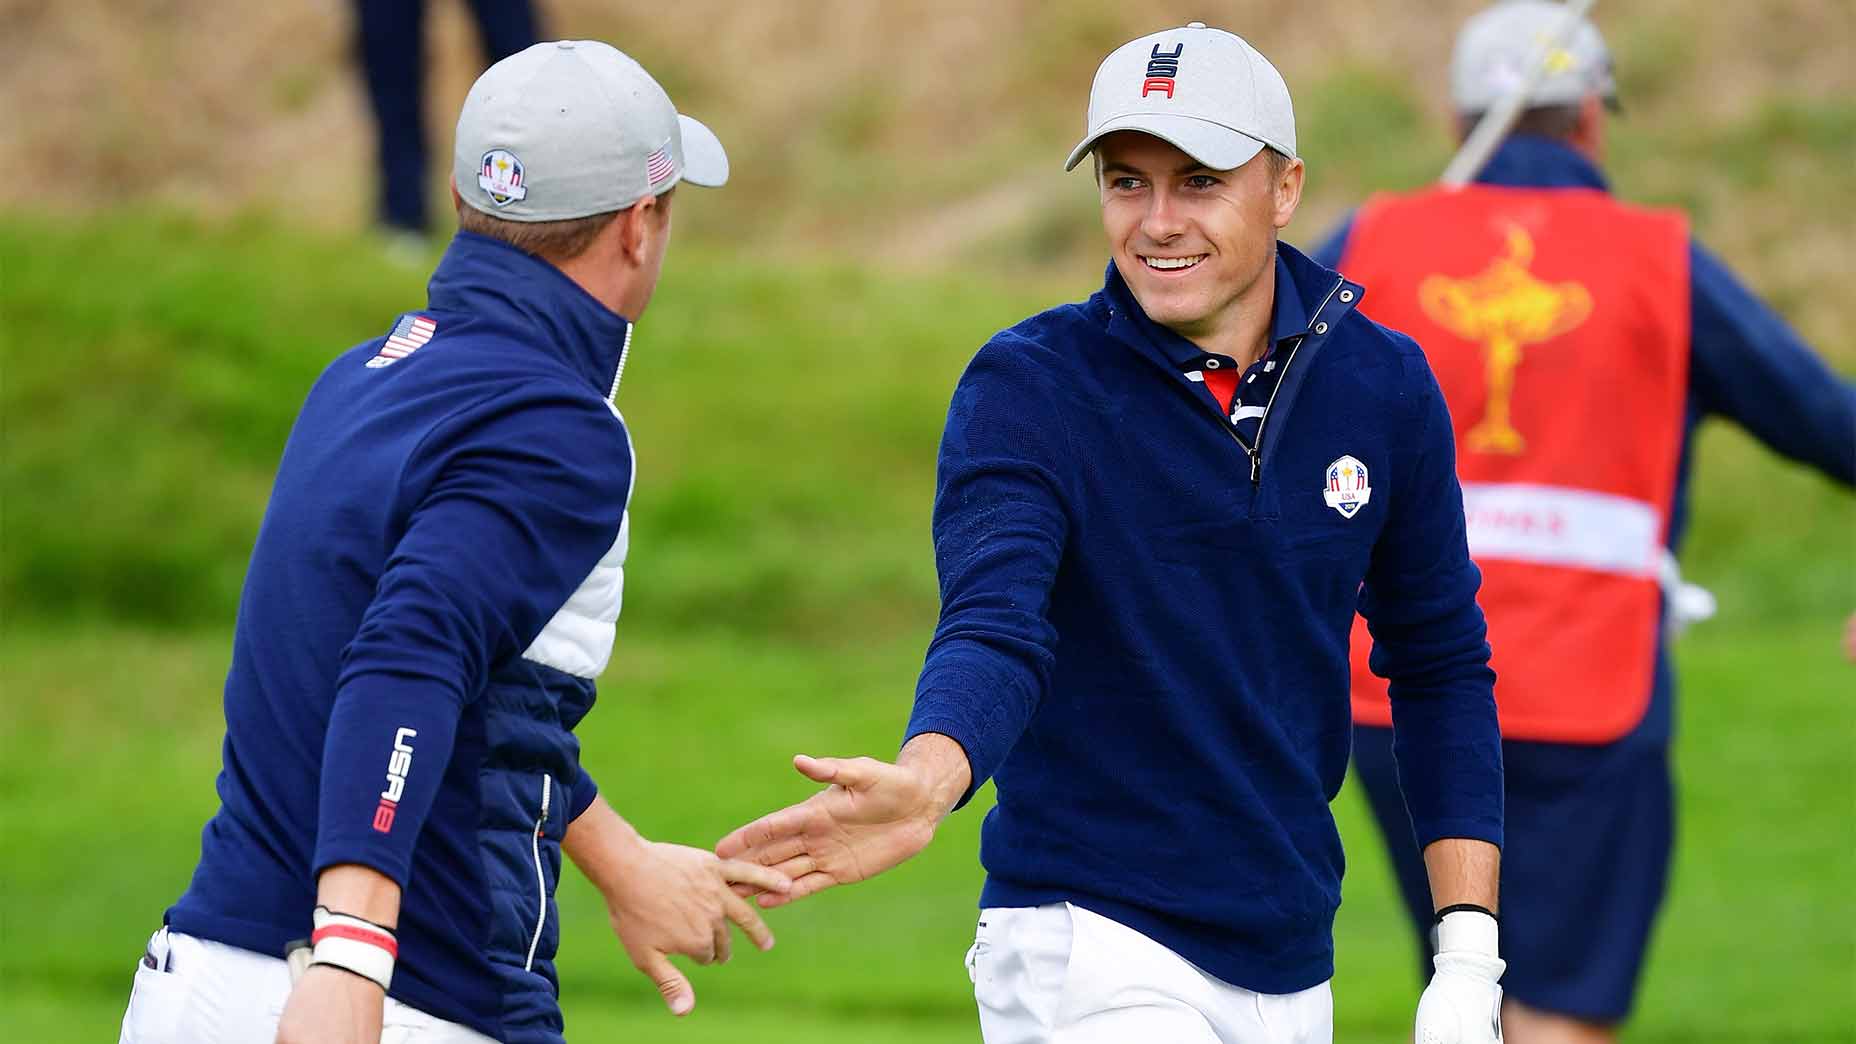 How To Watch Ryder Cup 2018